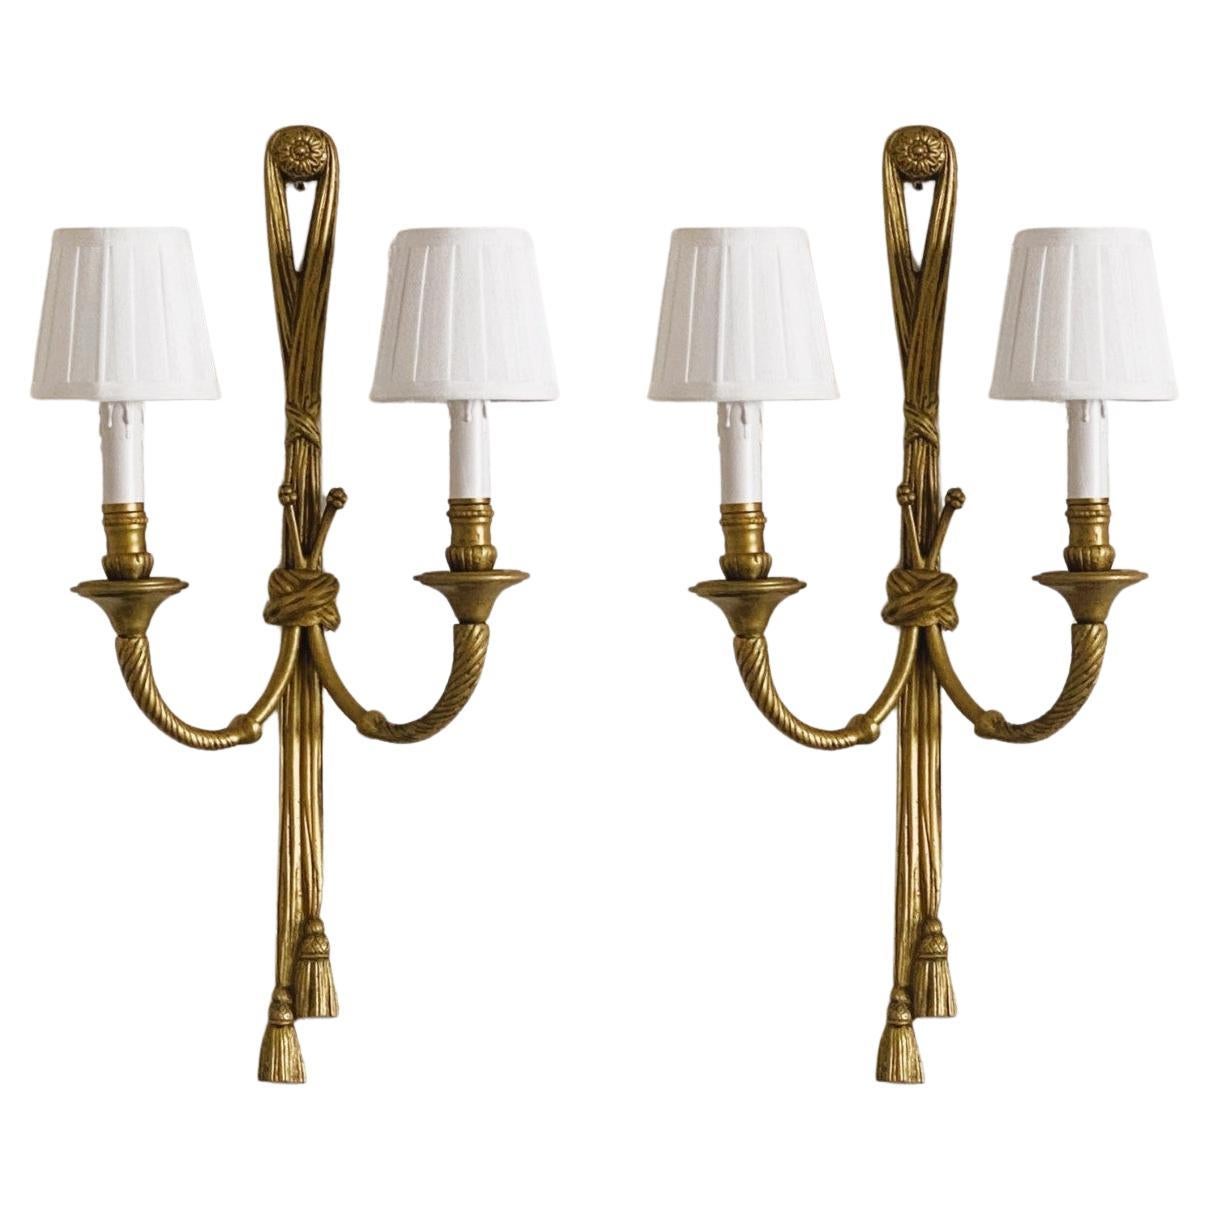 Pair of Tall French Louis XVI Gilt Bronze Electrified Wall Sconces, Late 19th C